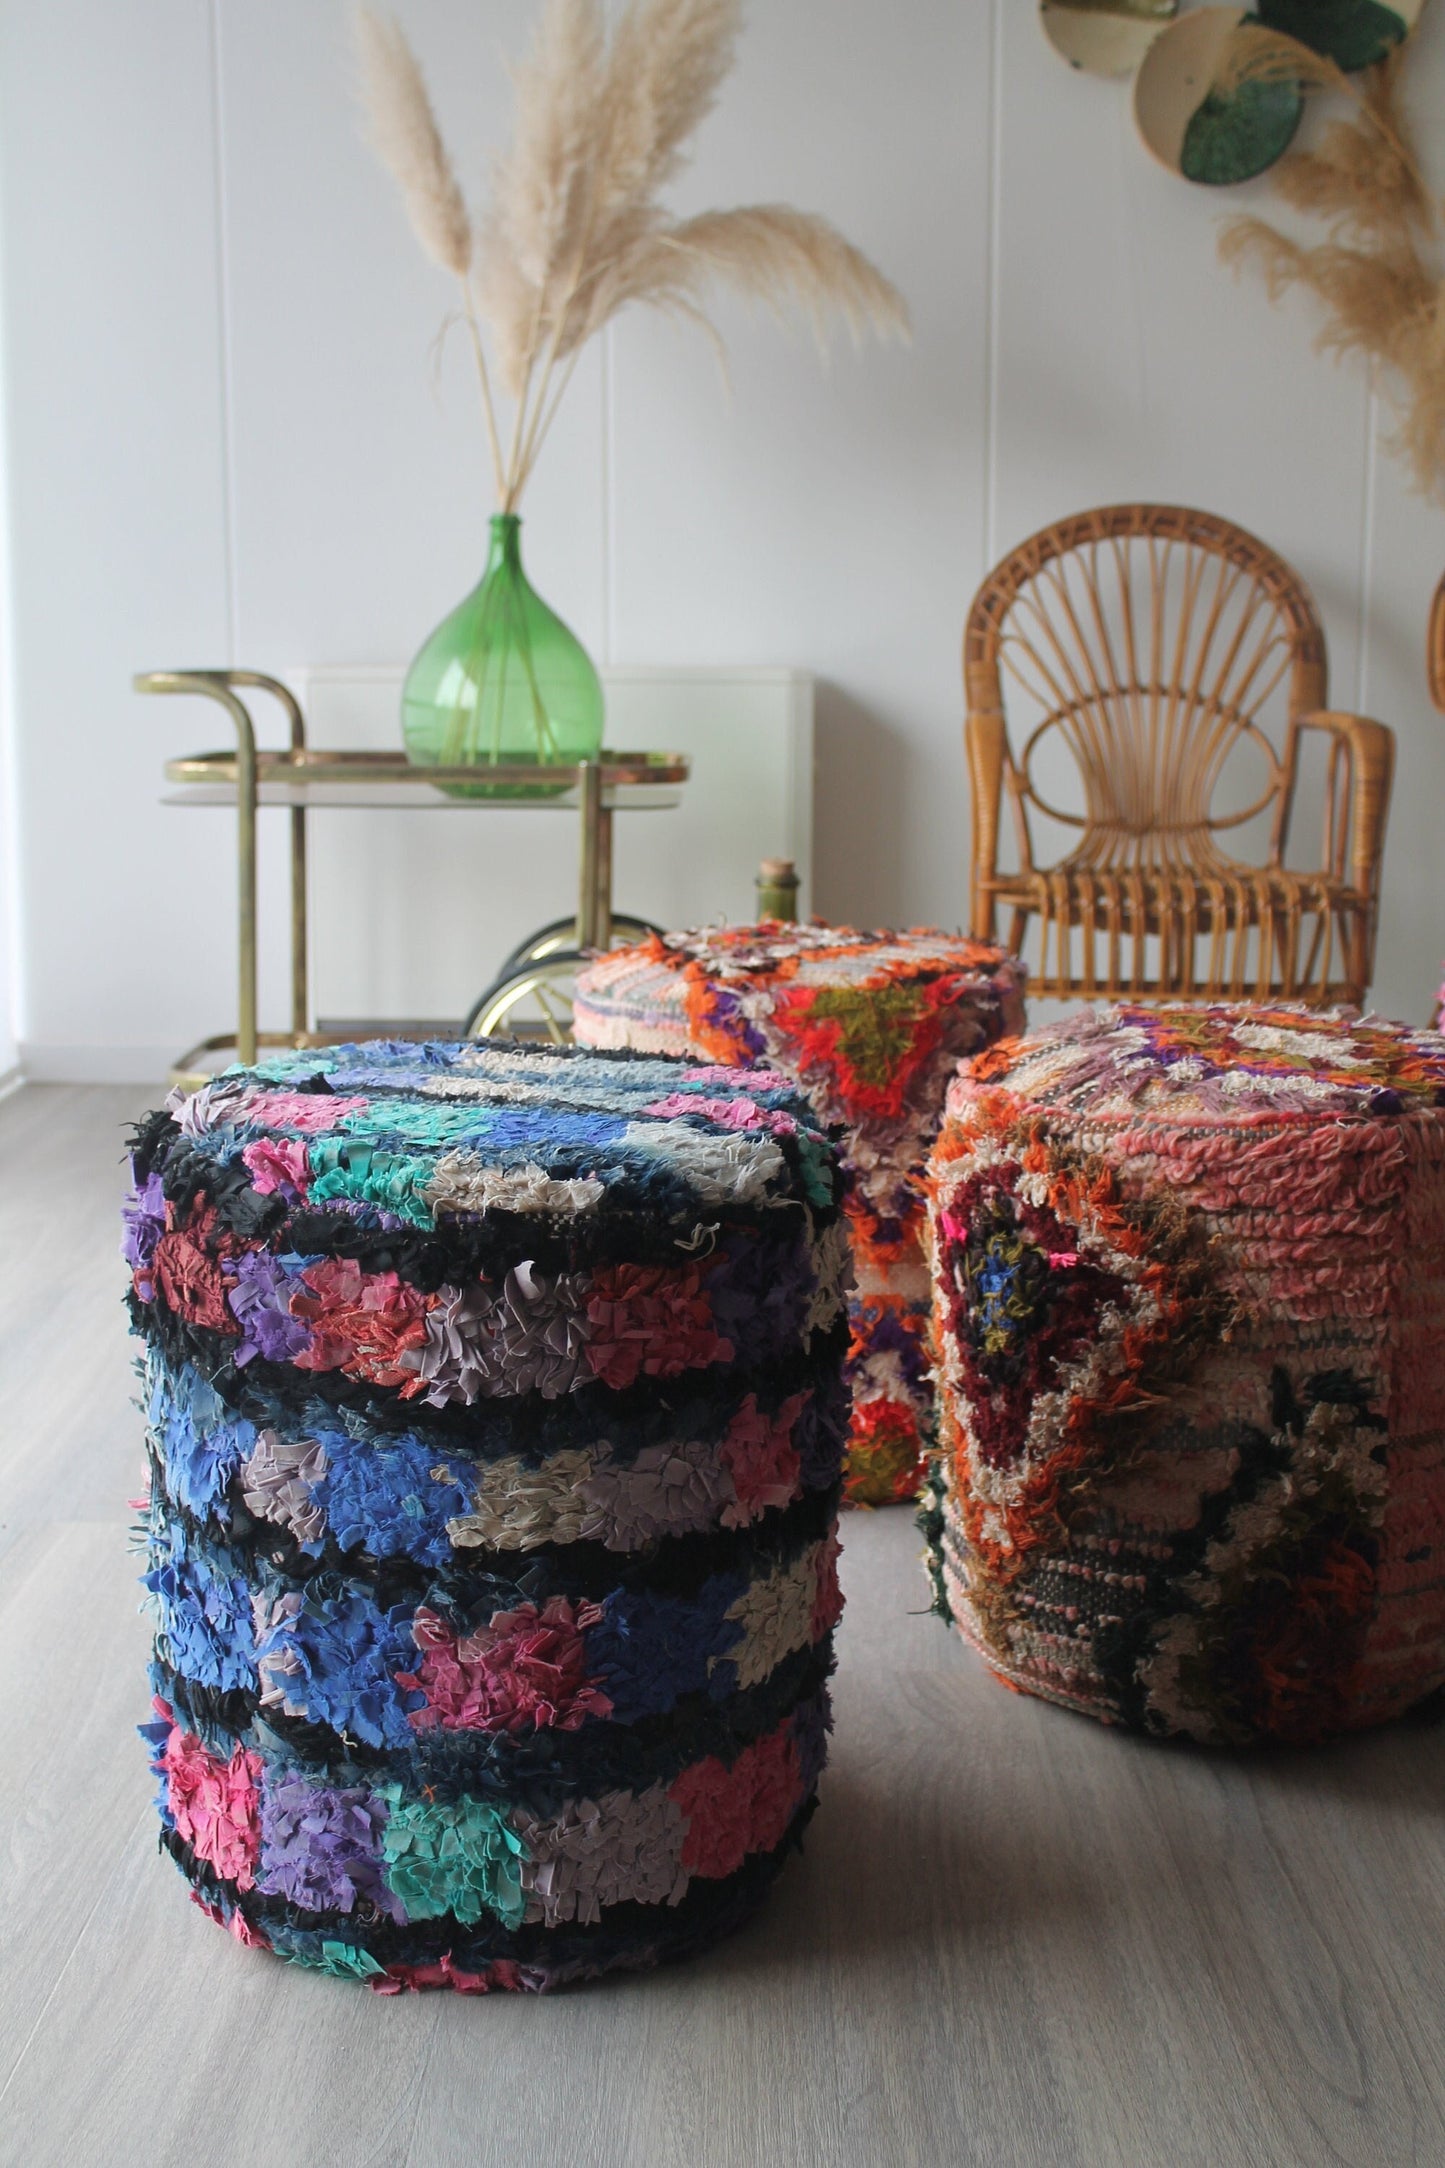 Wood and coton berber pouf (1), Blue, Turquoise and Pink pouf